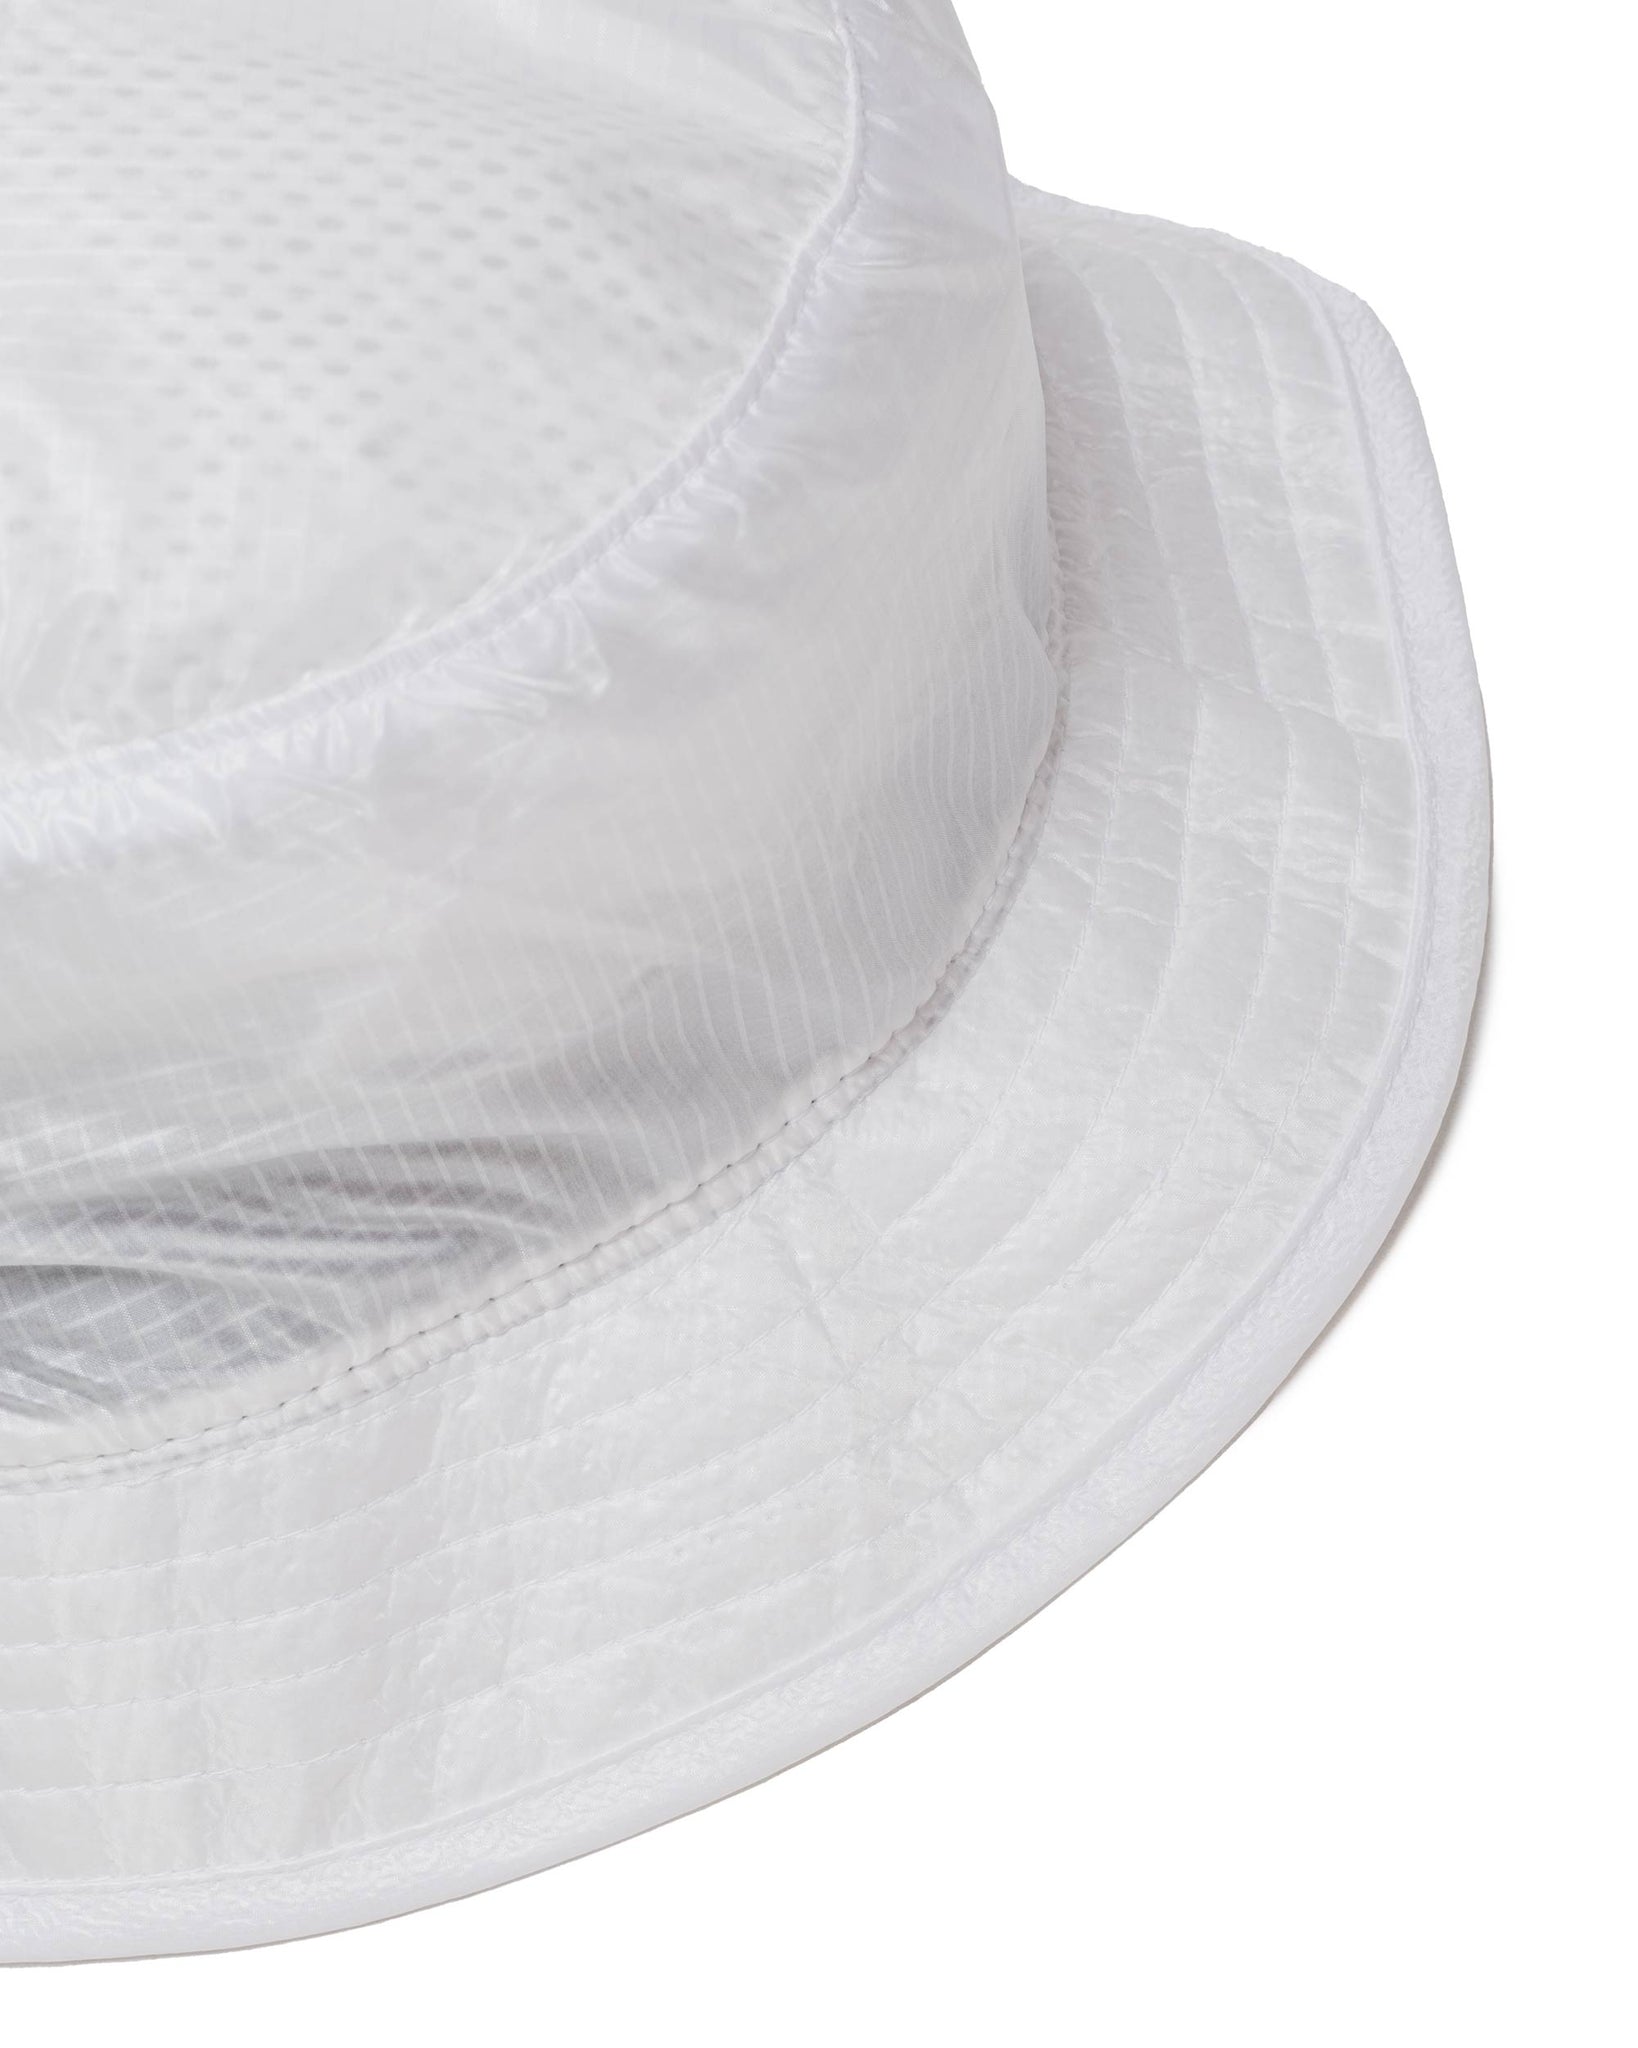 Found Feather Boonie Crusher Hat Air Light Ripstop White fabric